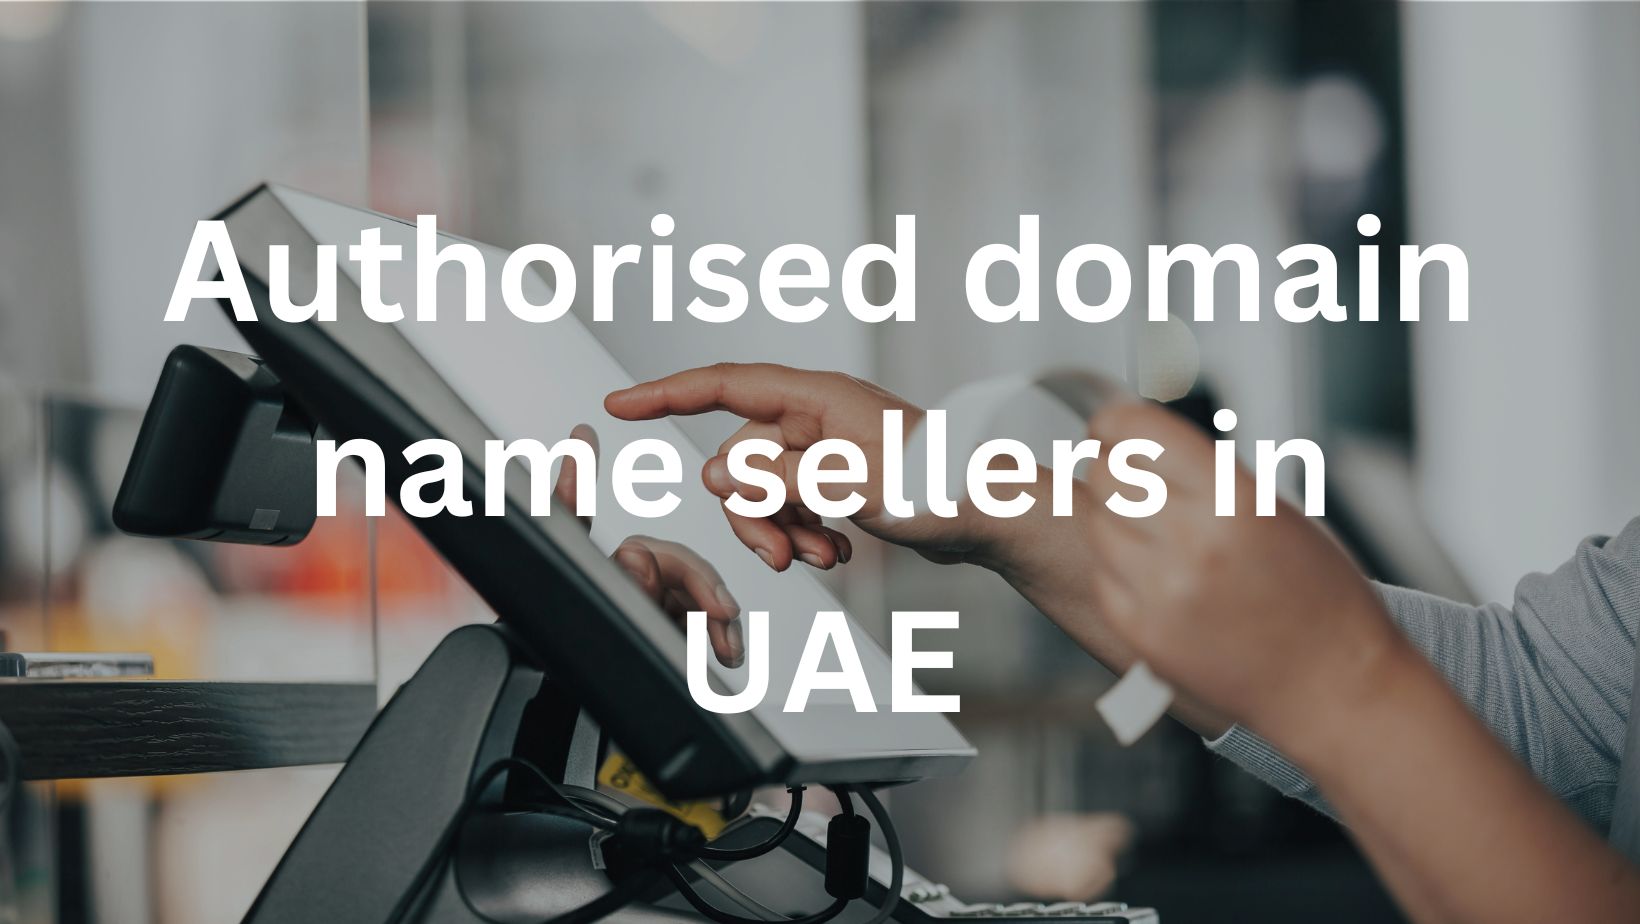 Who is An Authorised ae Domain Seller?